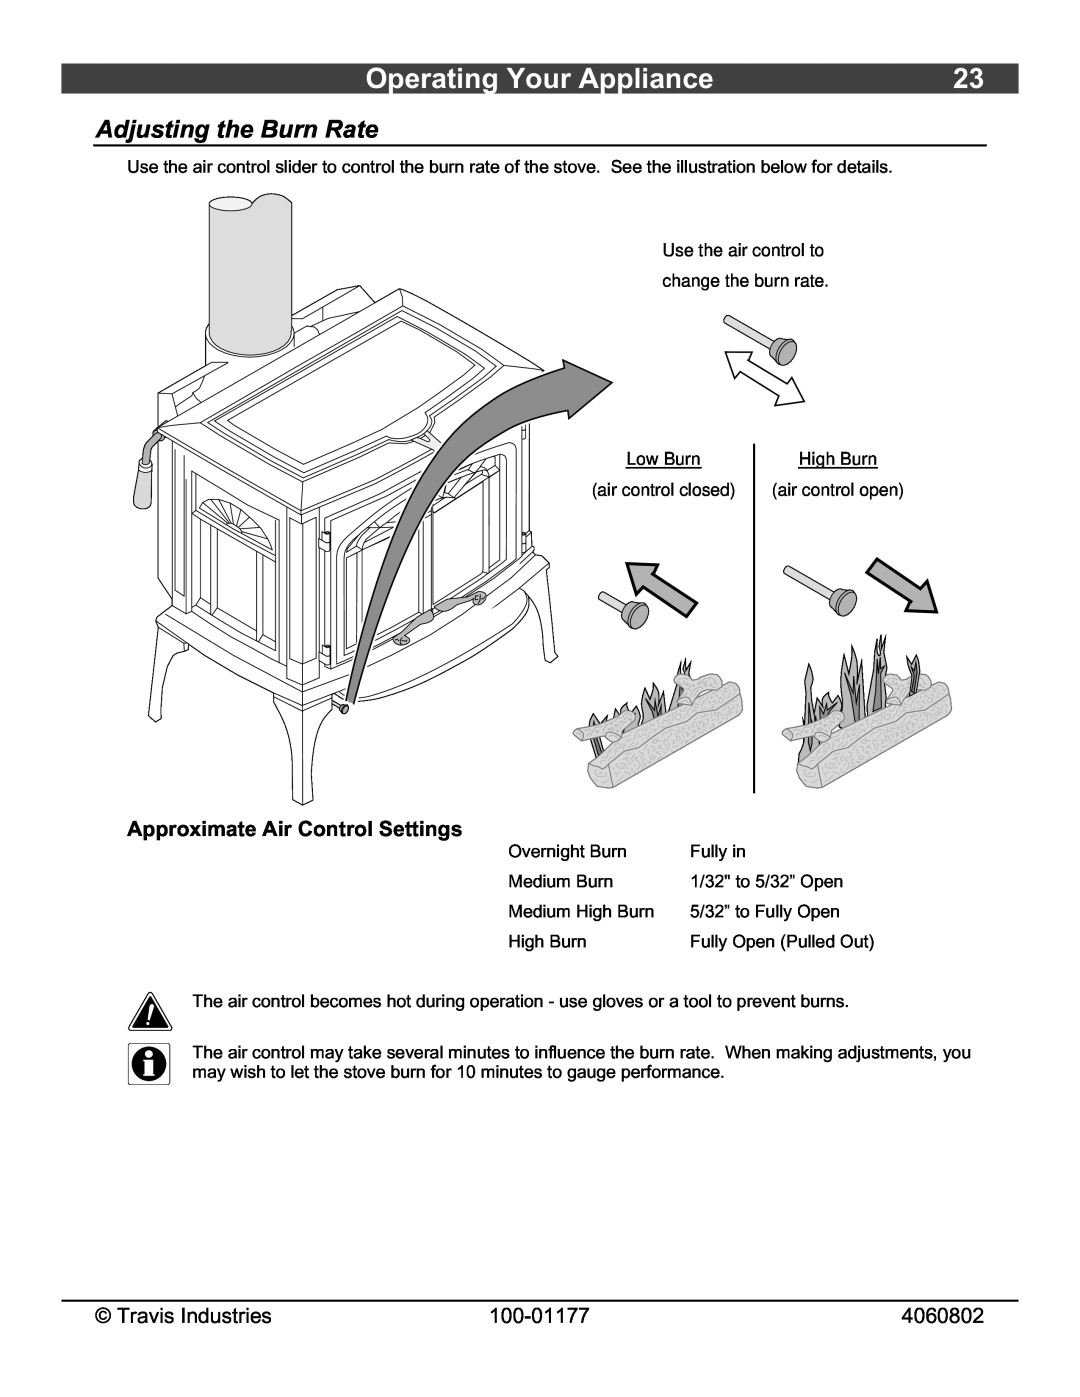 Lopi Stove owner manual Operating Your Appliance, Adjusting the Burn Rate, Approximate Air Control Settings 